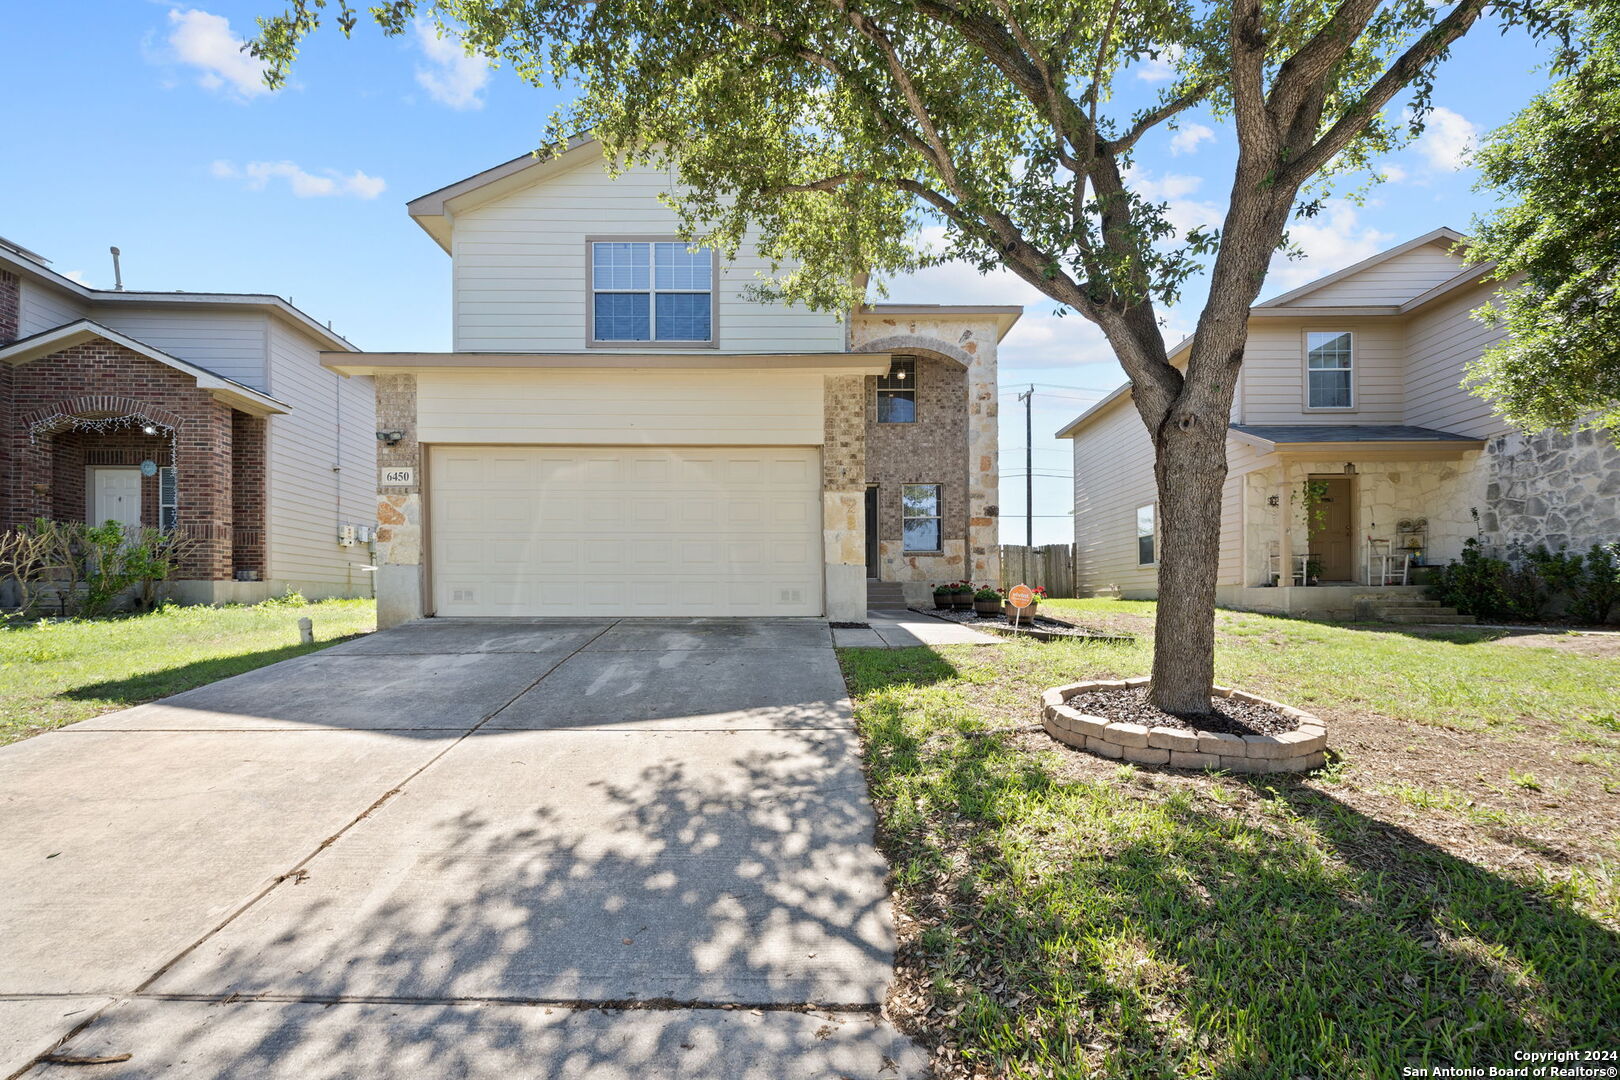 Photo of 6450 Candleview Ct in San Antonio, TX